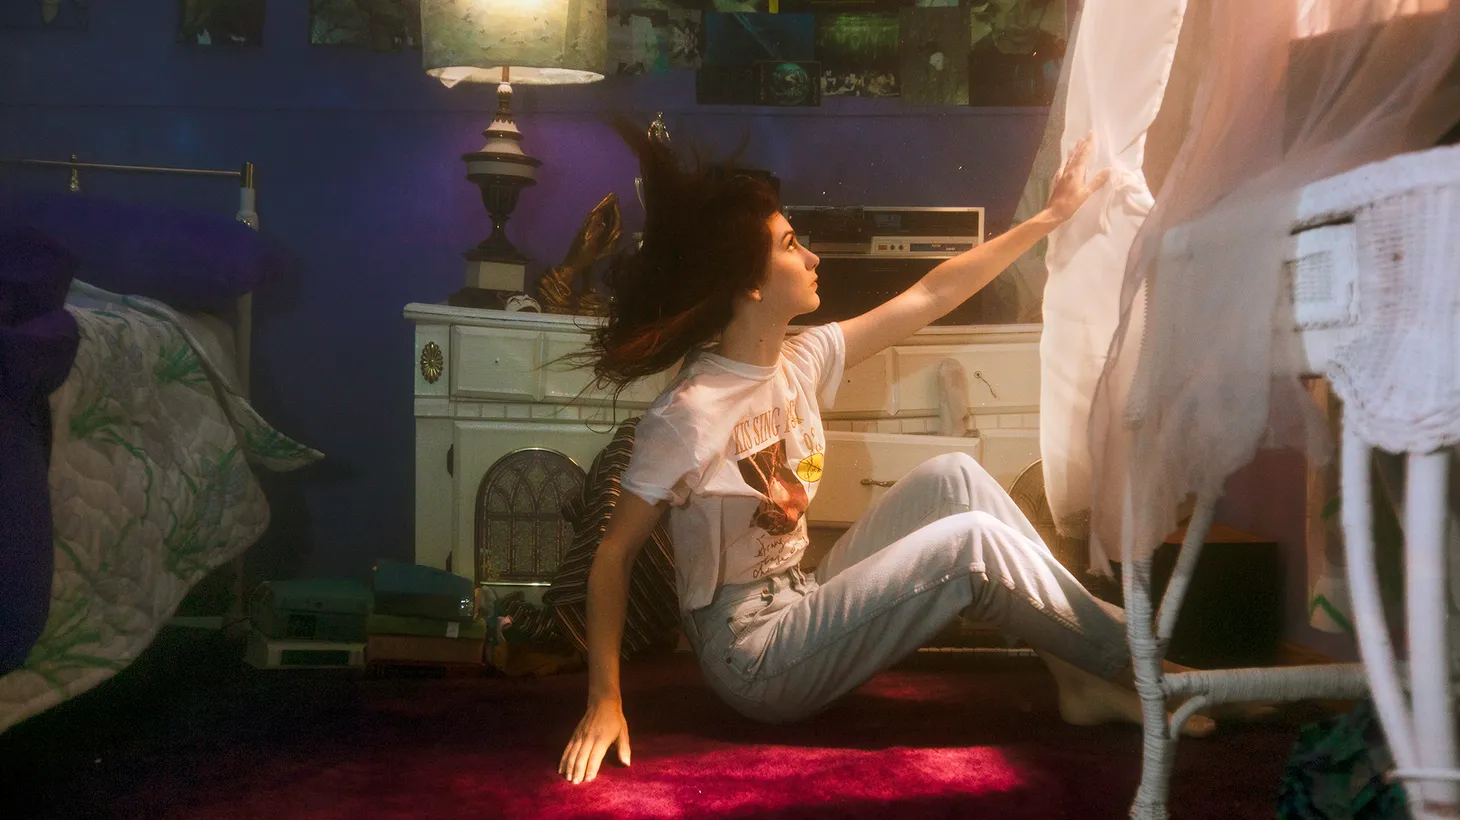 Natalie Laura Mering has released four albums under her stage name Weyes Blood. On her latest album Titantic Rising, the Santa Monica born singer songwriter has put her musical talents on full display.